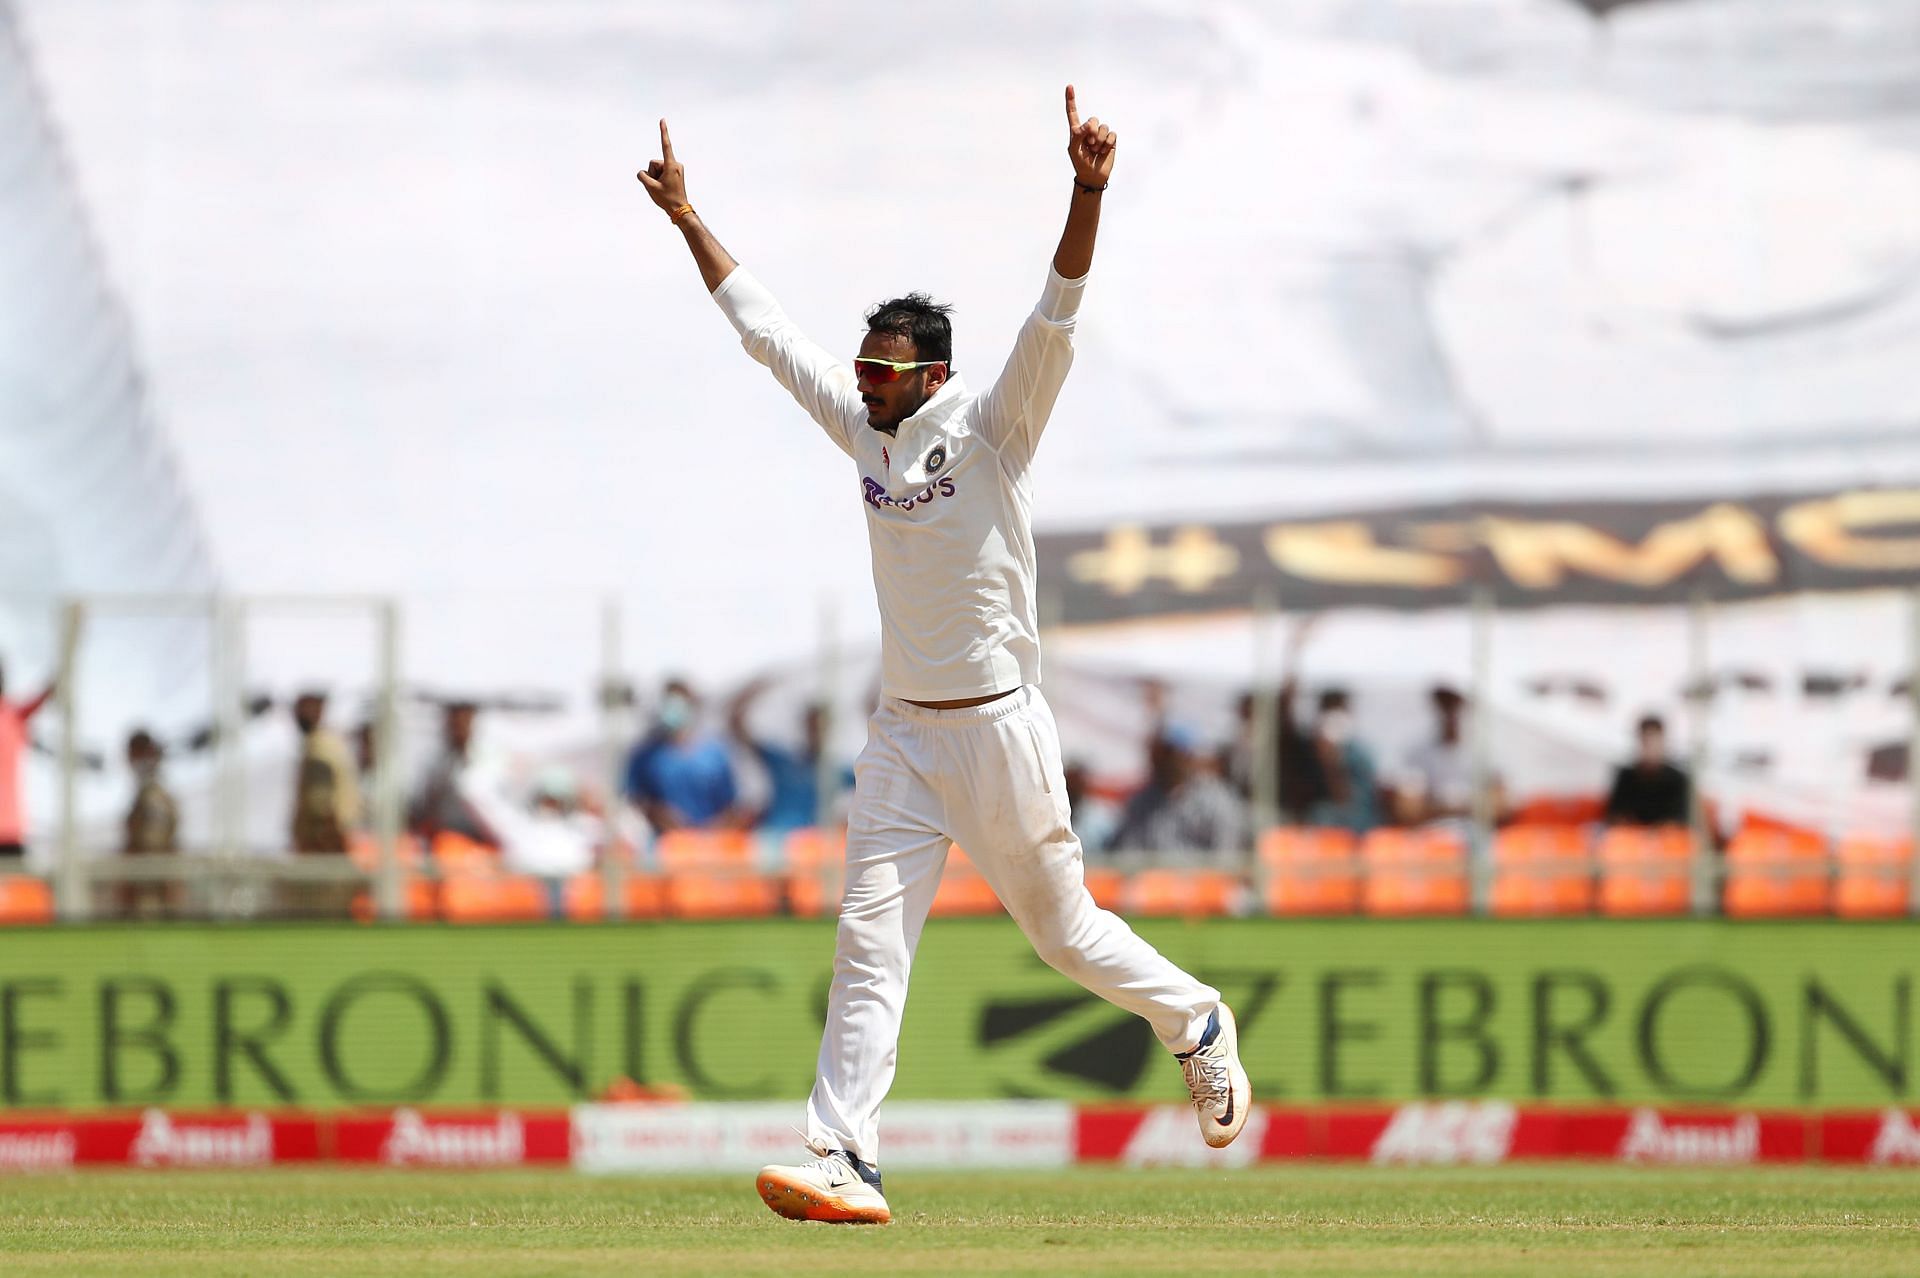 Axar Patel had an unforgettable debut Test series. (Pic: Getty Images)